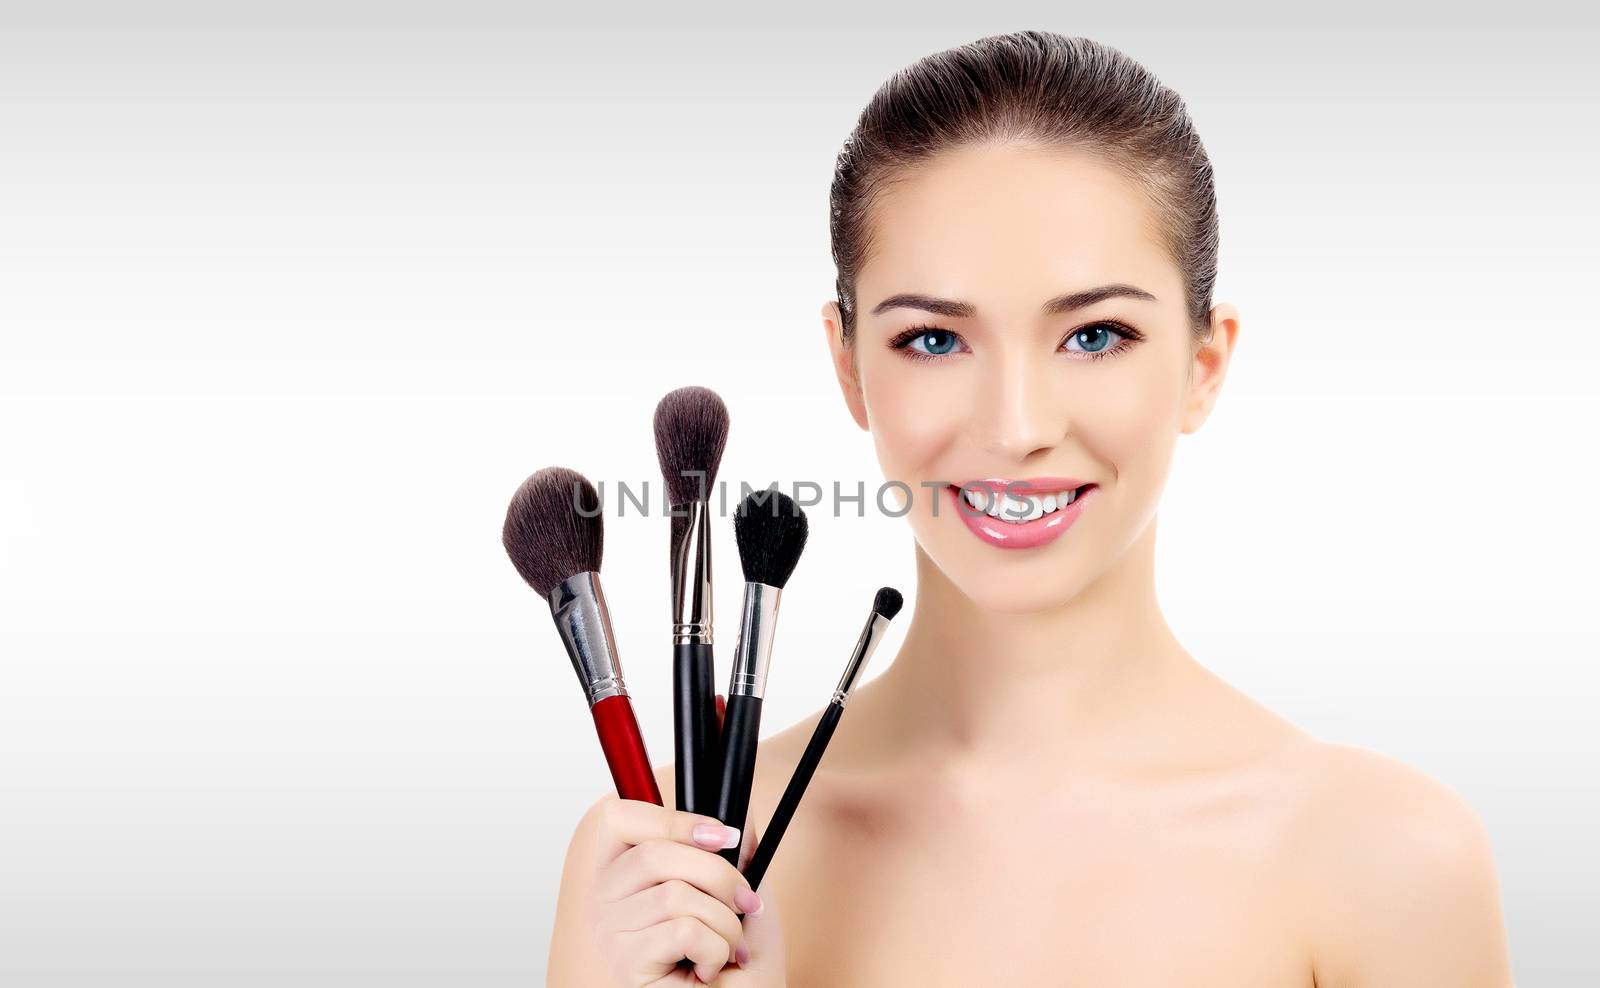 Pretty woman with makeup brushes against a grey background with copyspace